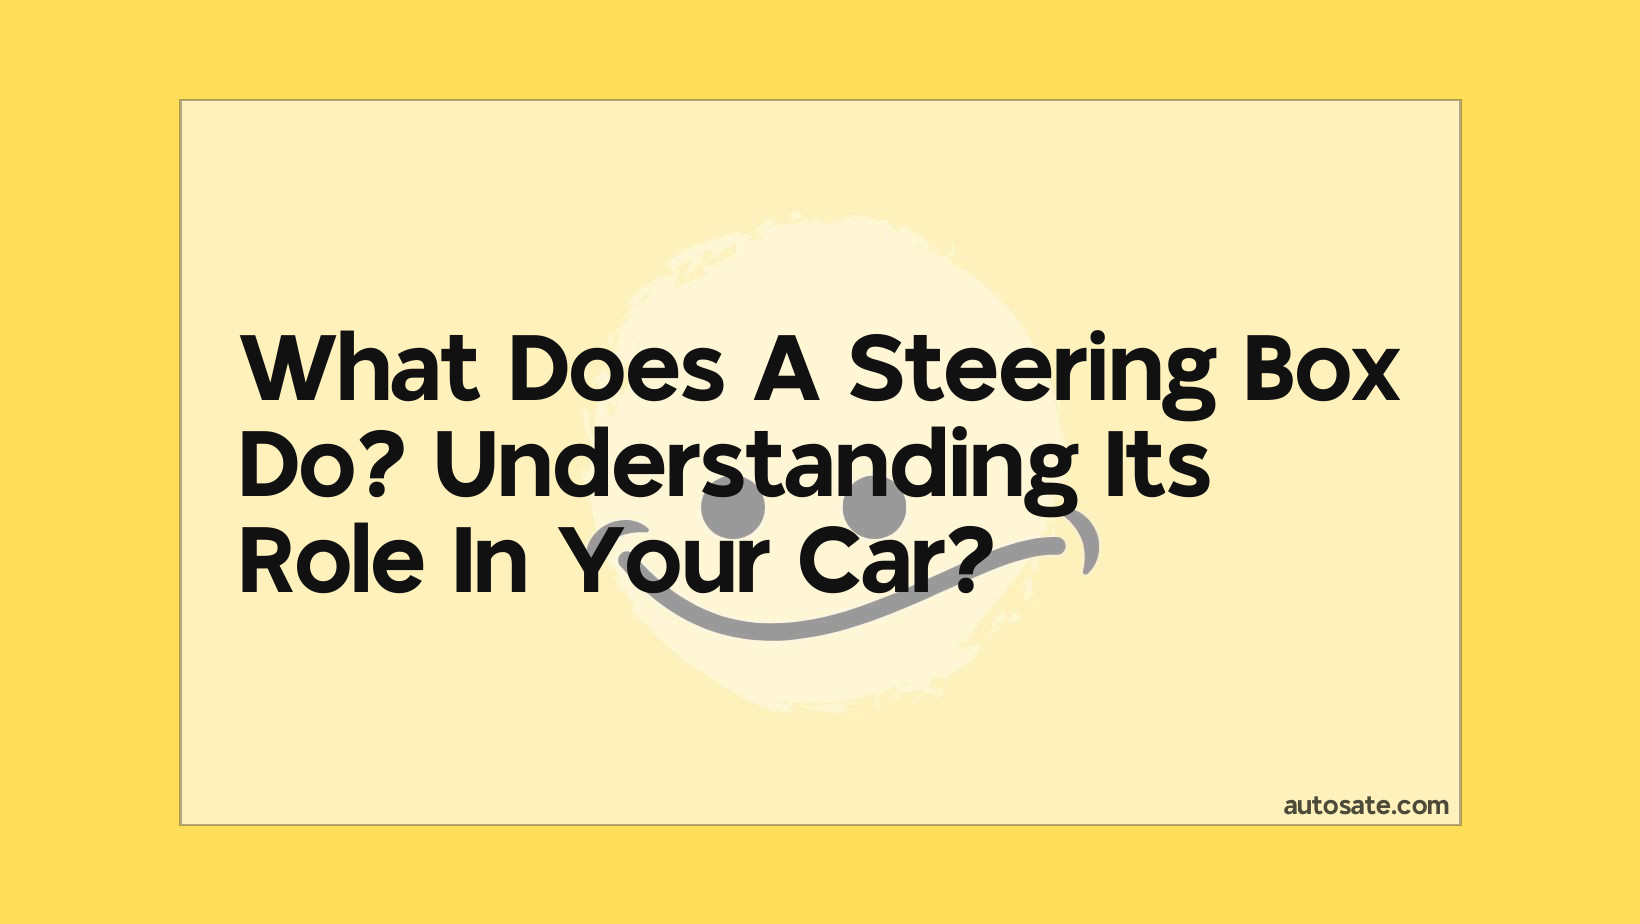 What Does A Steering Box Do? Understanding Its Role In Your Car